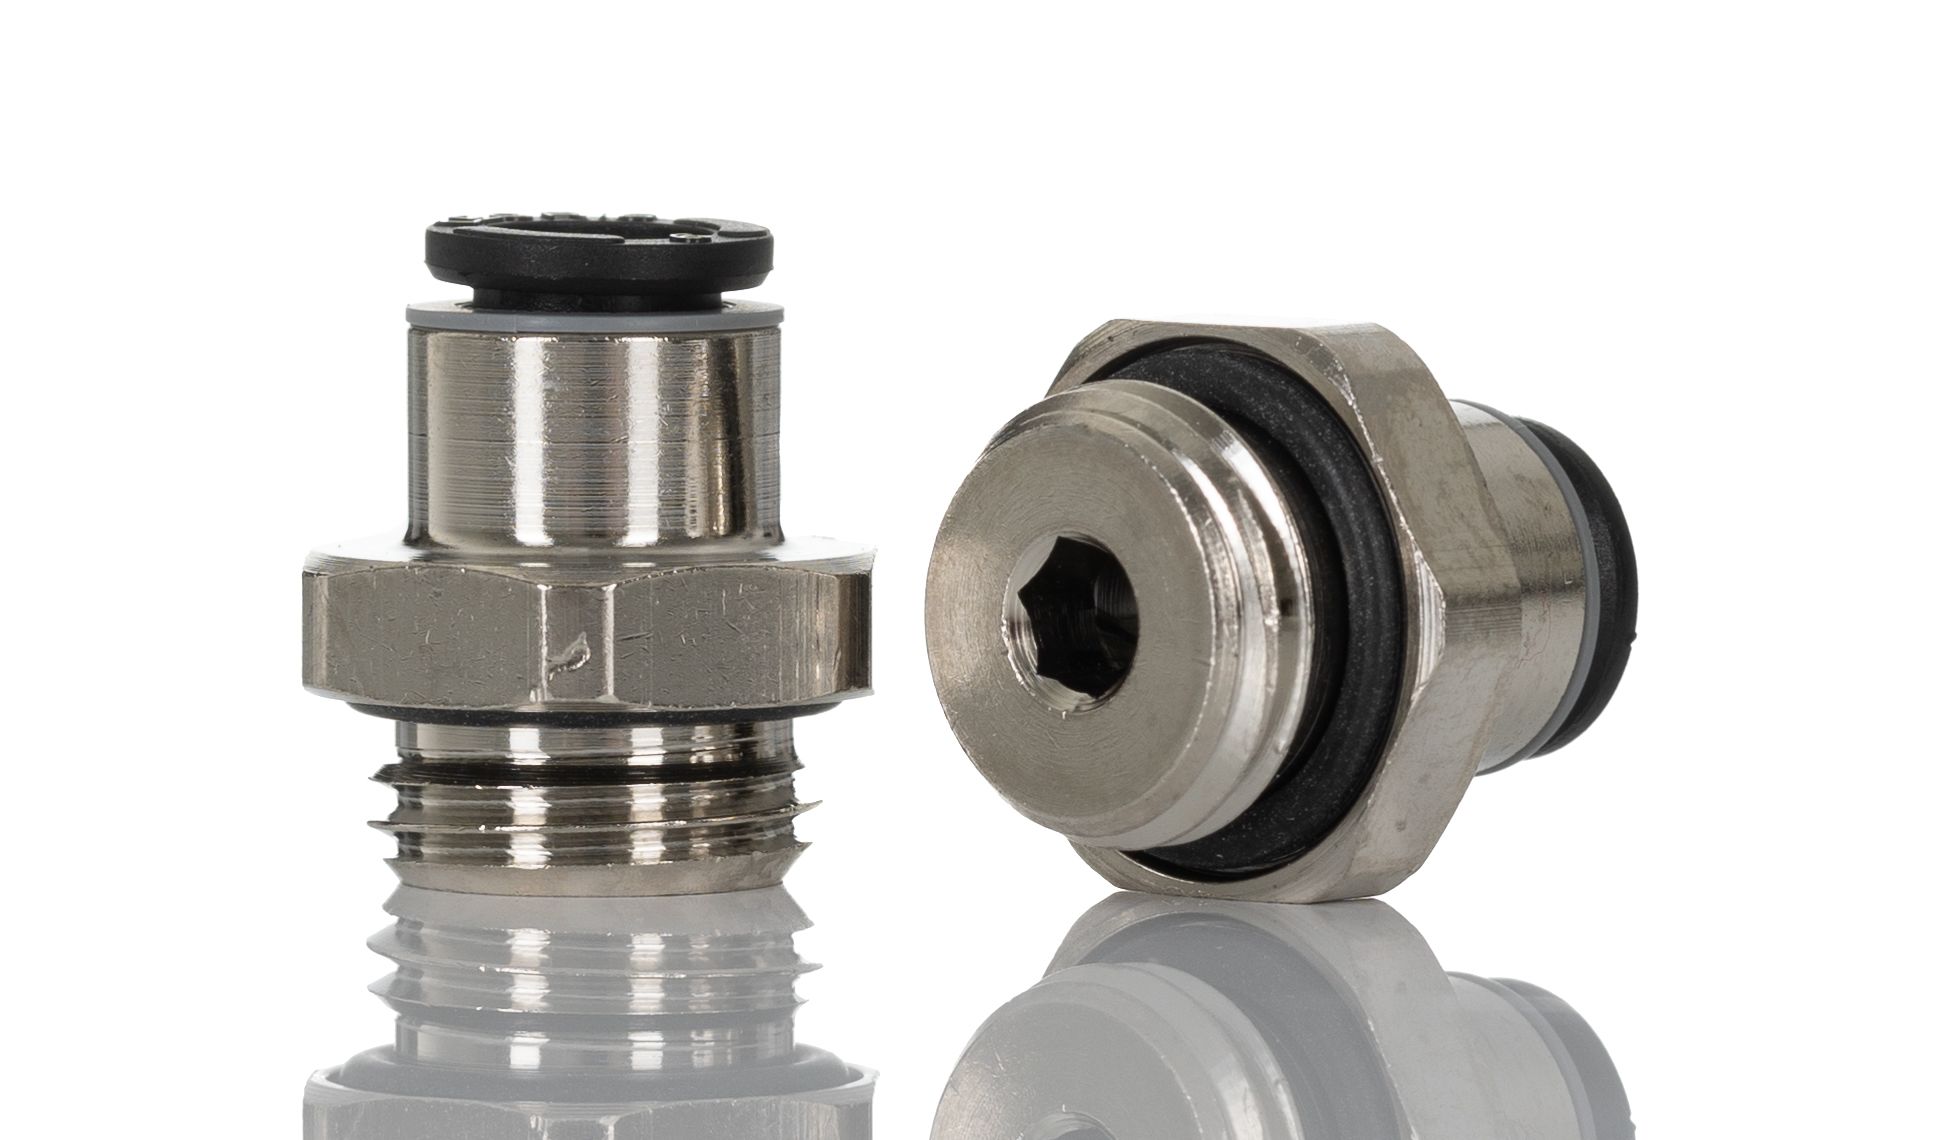 Legris LF3000 Series Straight Threaded Adaptor, G 1/4 Male to Push In 6 mm, Threaded-to-Tube Connection Style